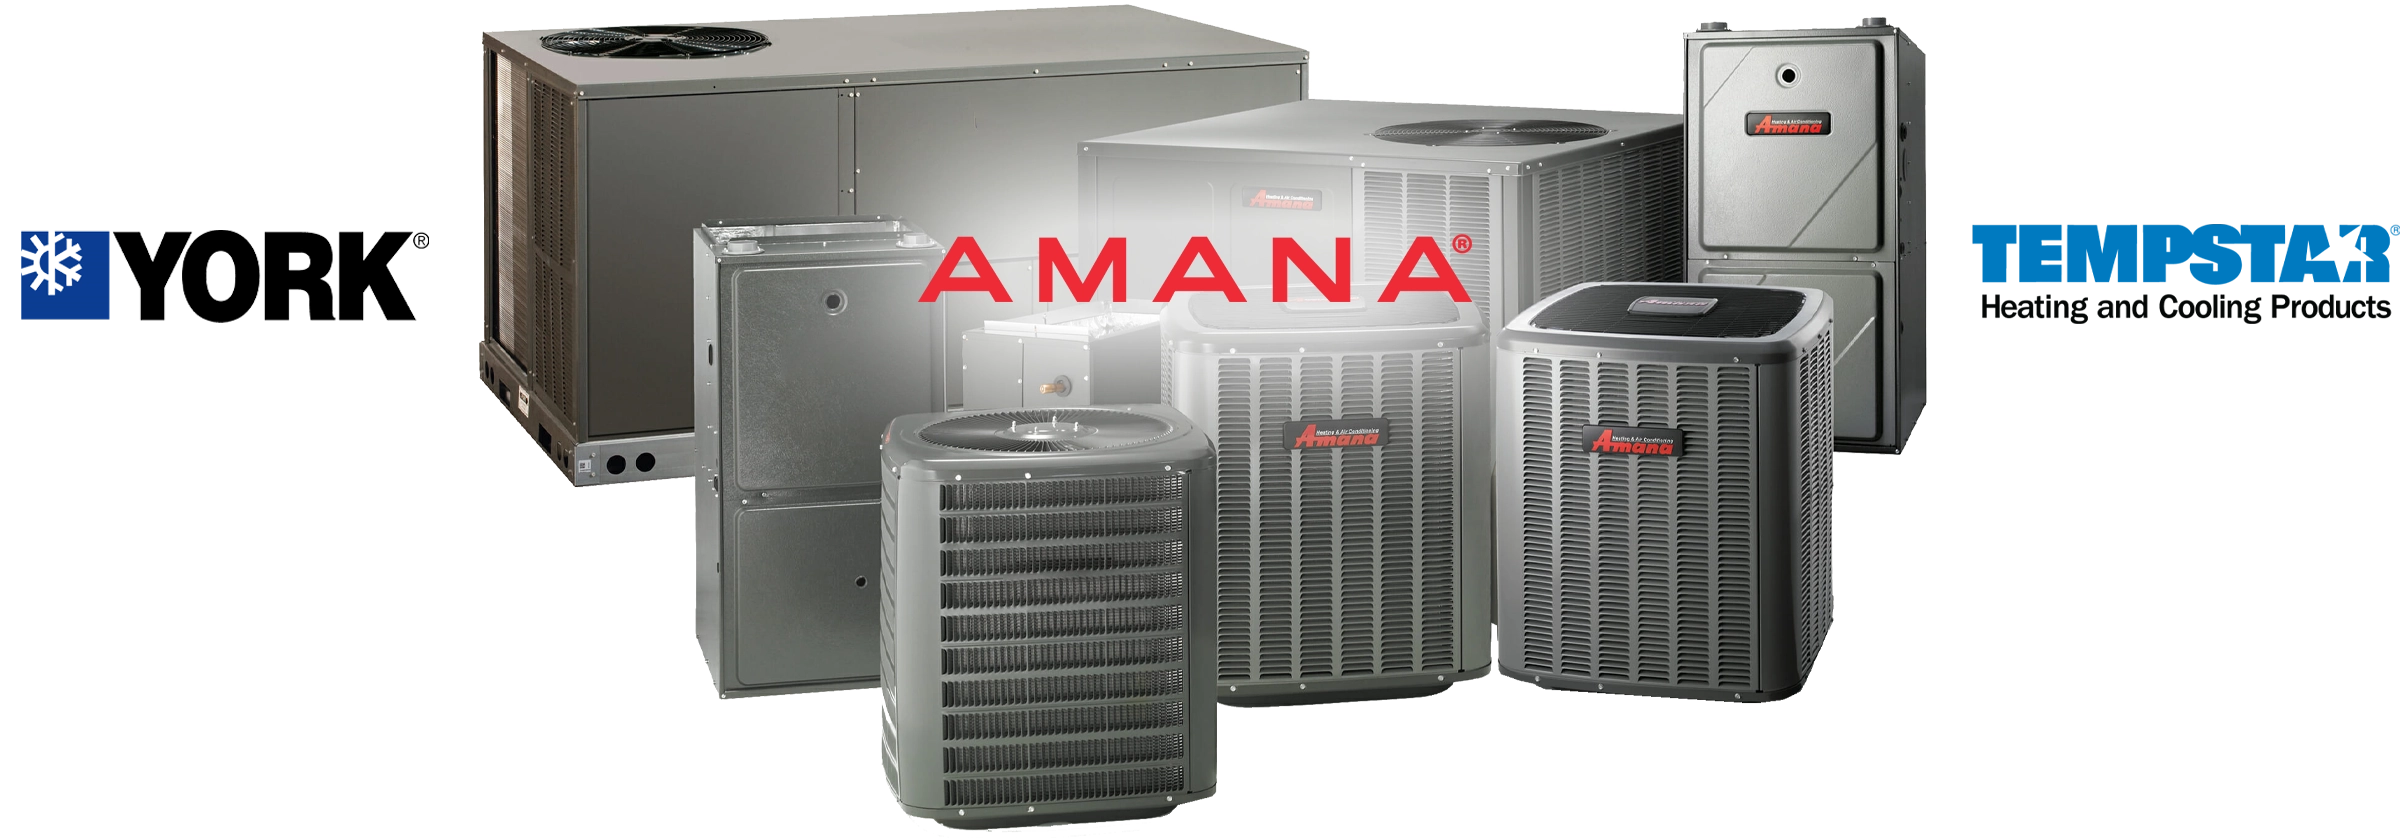 Michigan Comfort Systems Heating and Cooling works with Amana AC products in Wayne County MI.